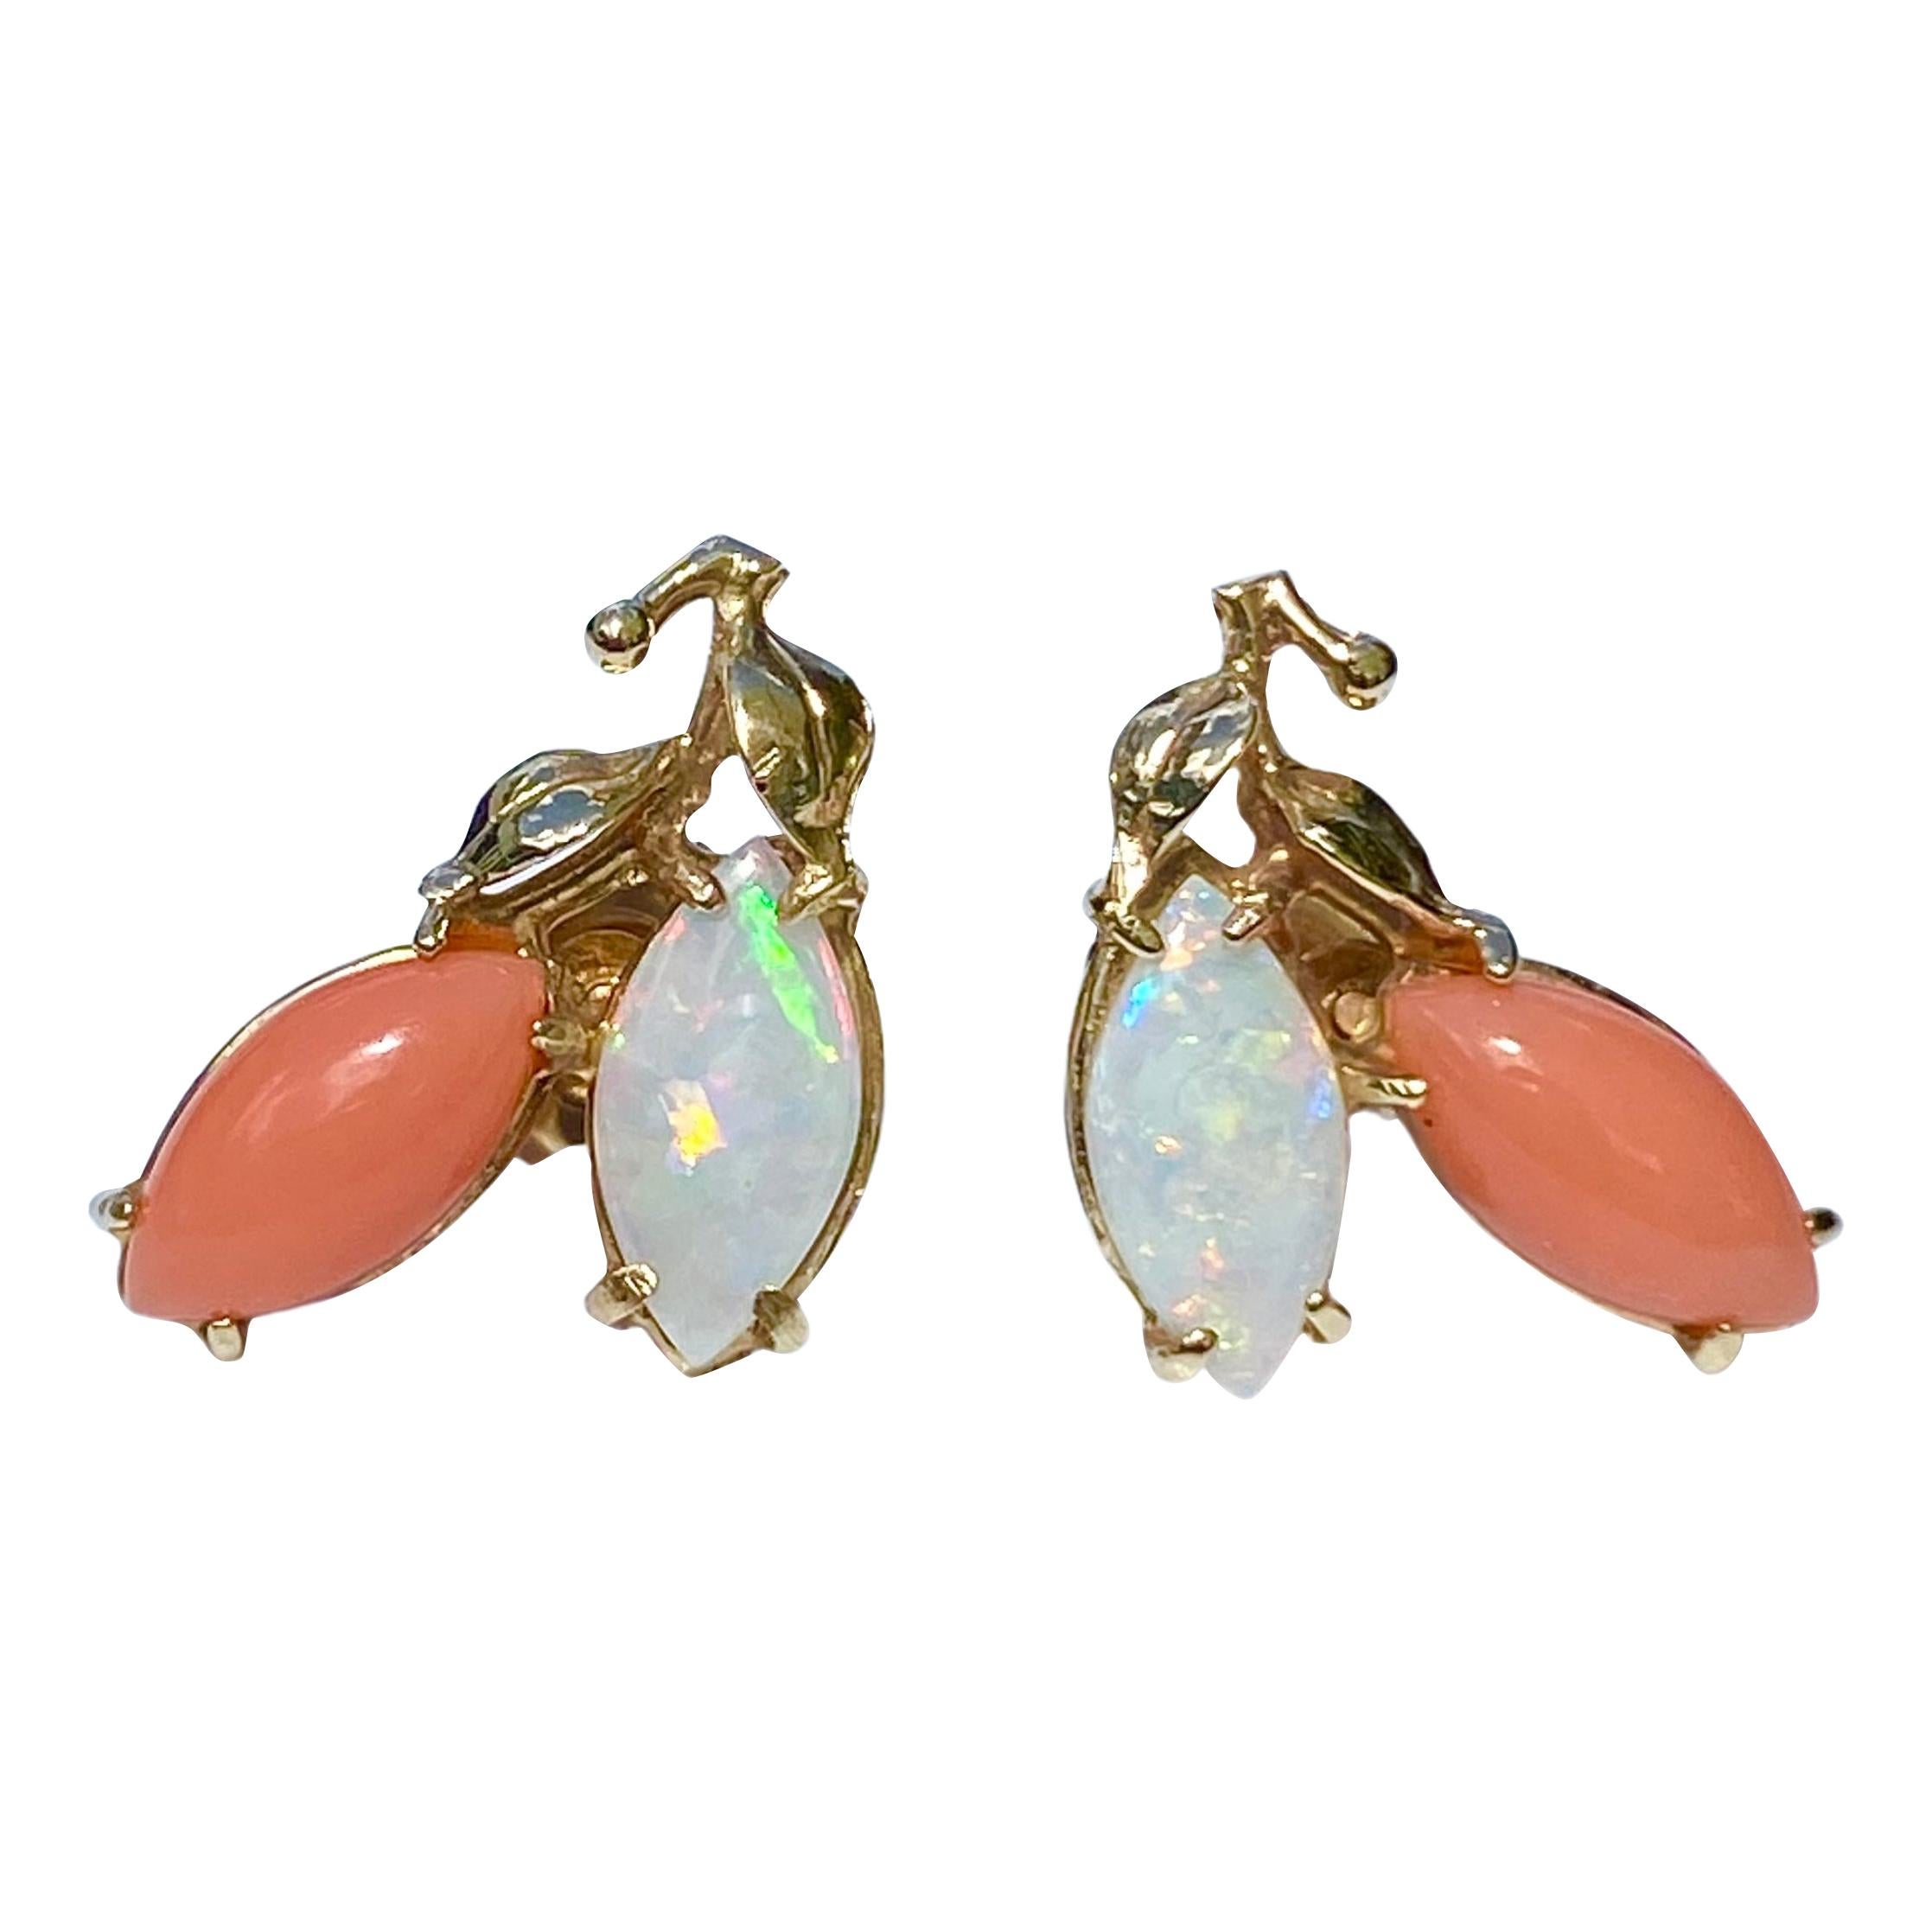 Marquis-Cut Opal and Coral Grapevine Stud 14K Yellow Gold Earrings